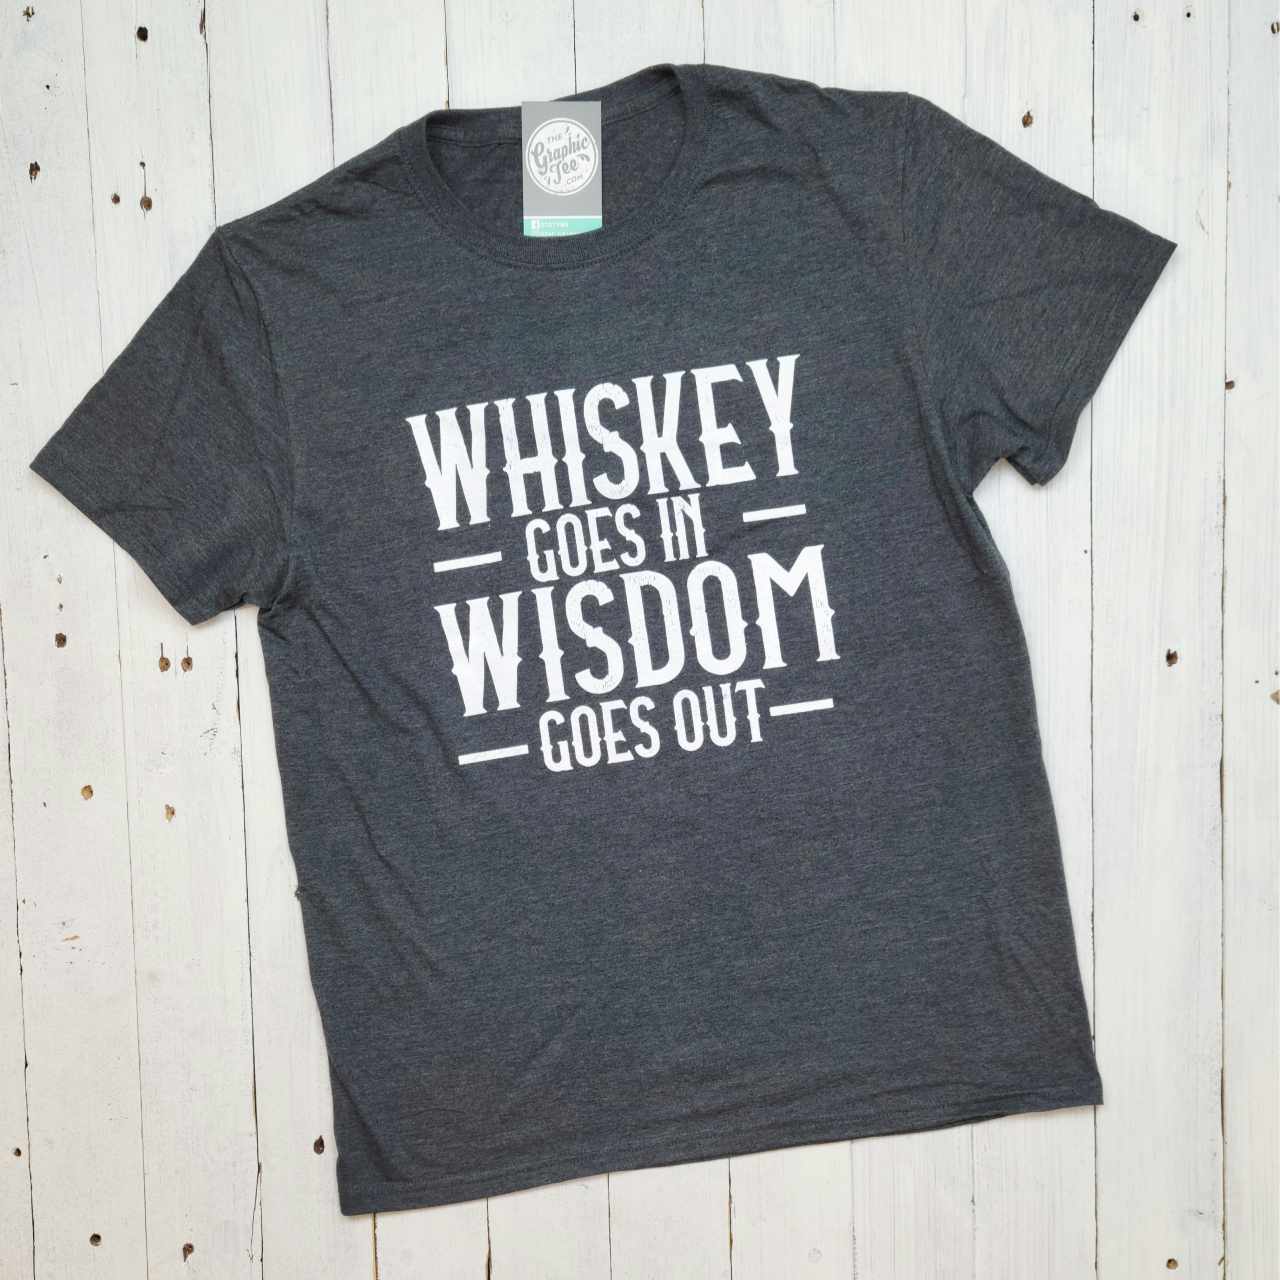 Whiskey Goes In Wisdom Goes Out - Adult Tee - The Graphic Tee